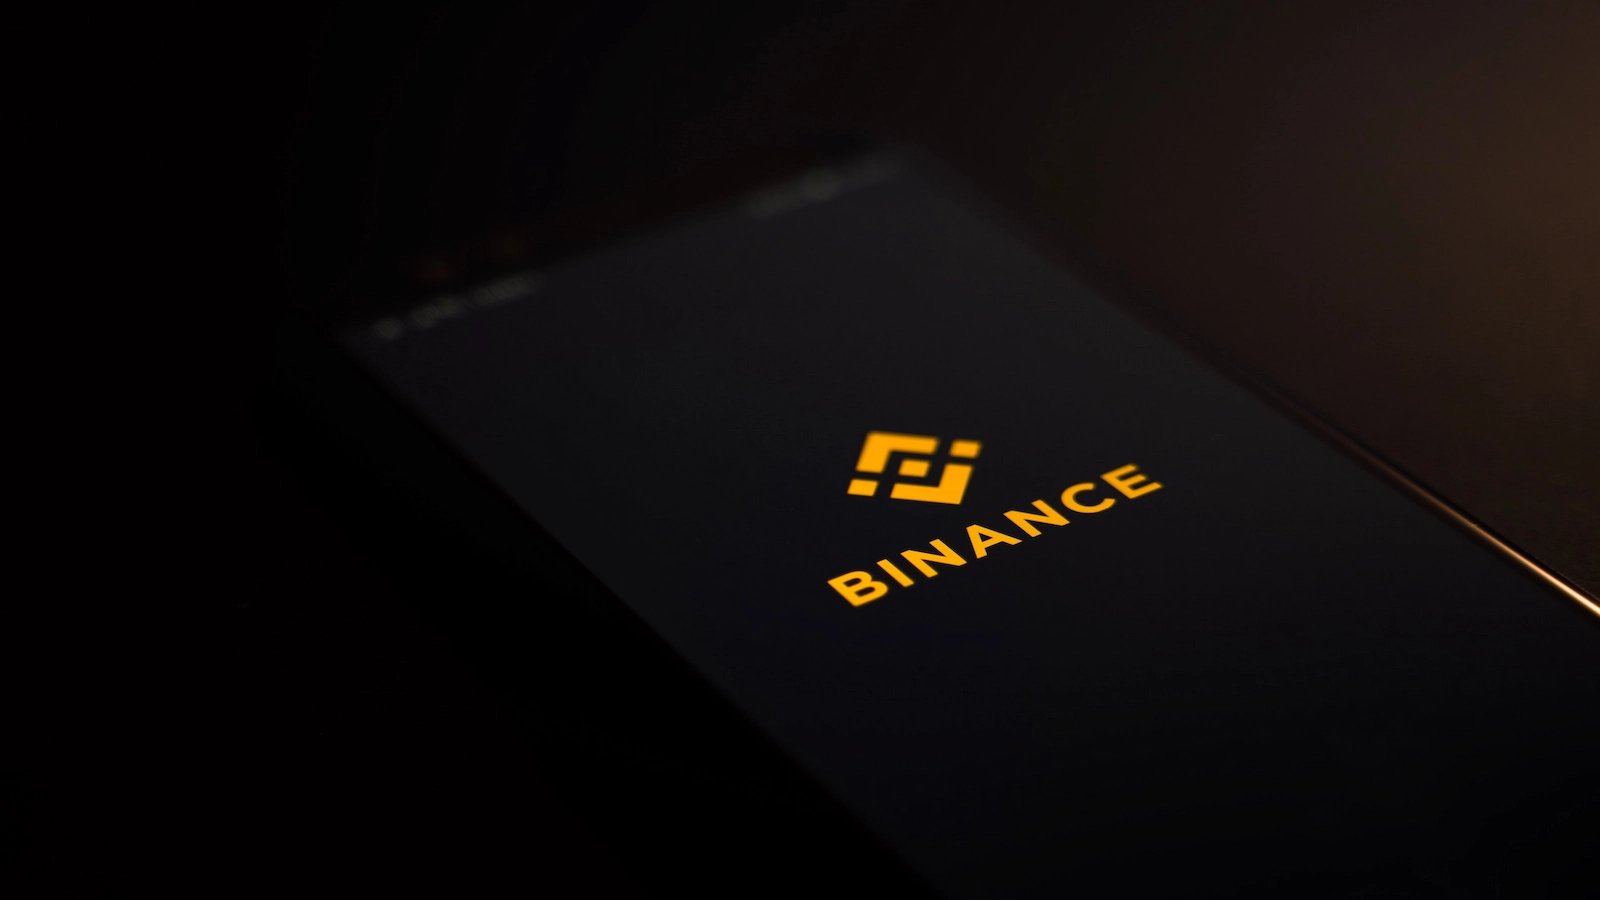 Binance courts another scandal, this time in the UK